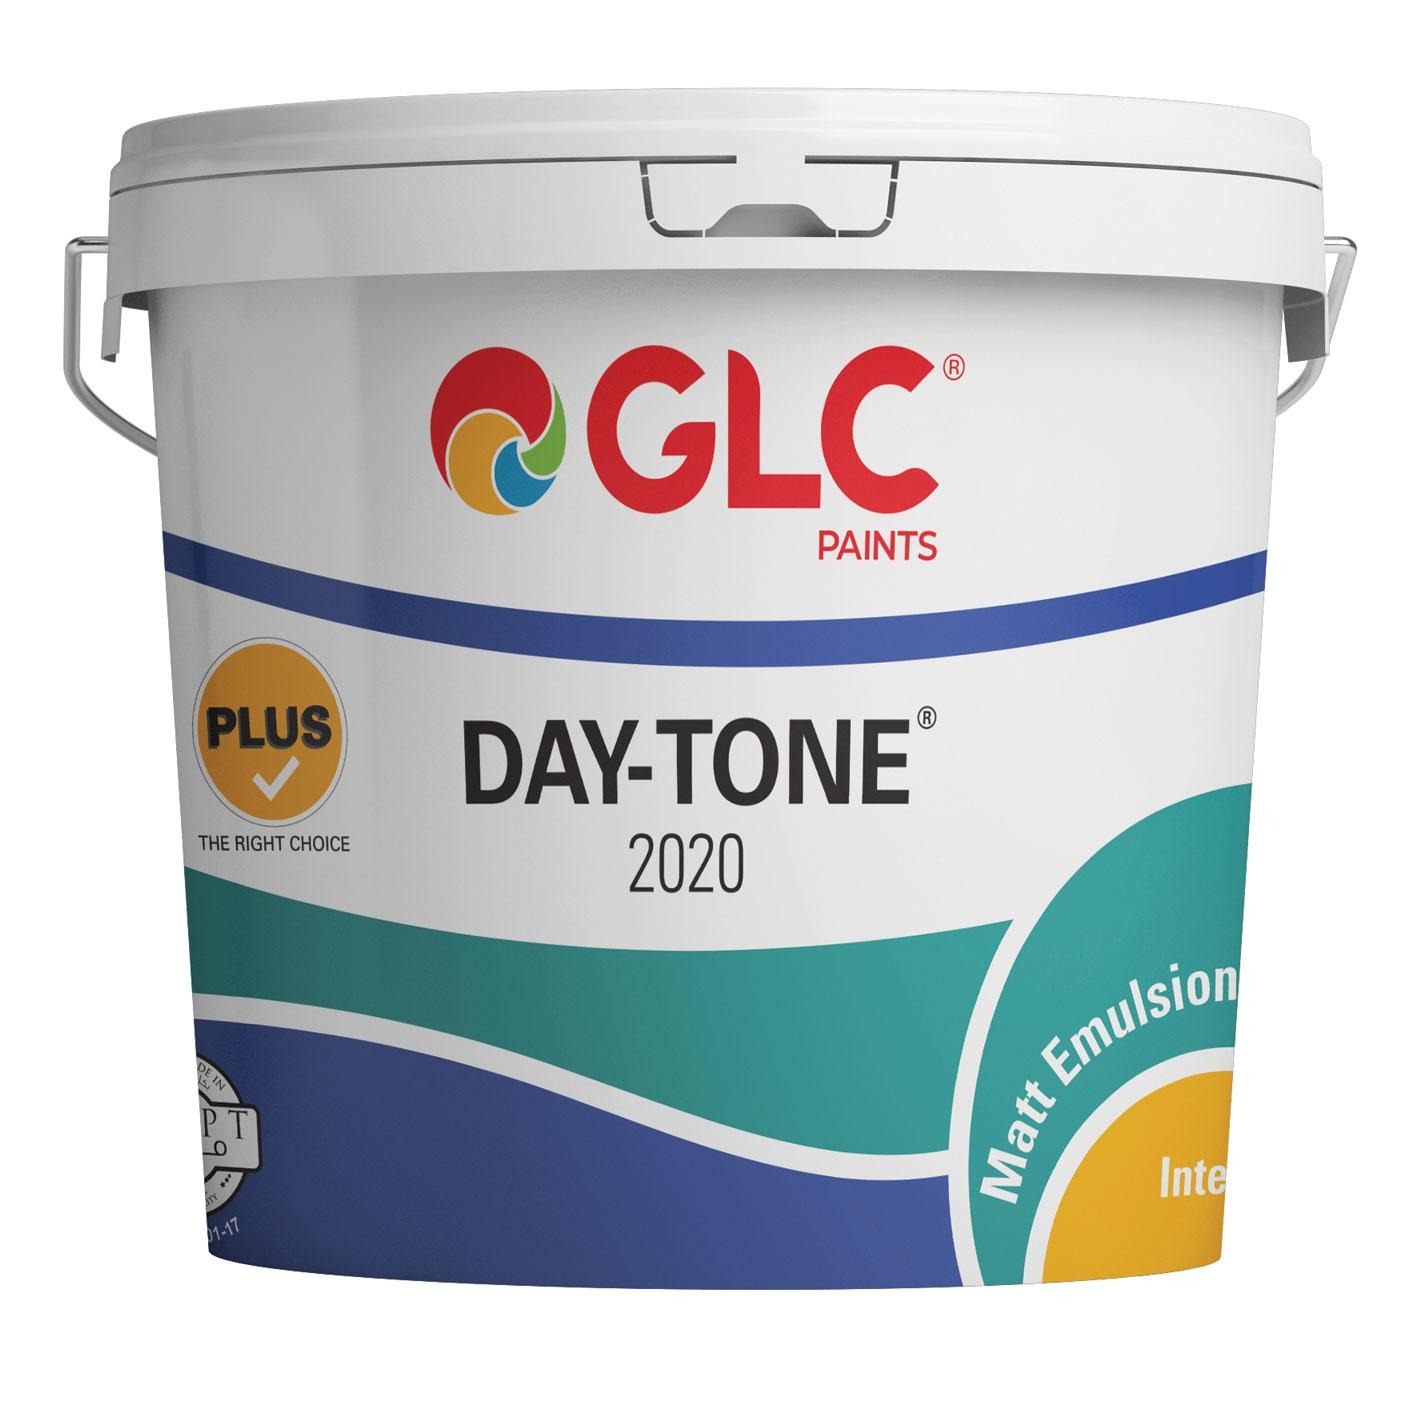 Day-Tone 2020 Painting - 3.75 Kg